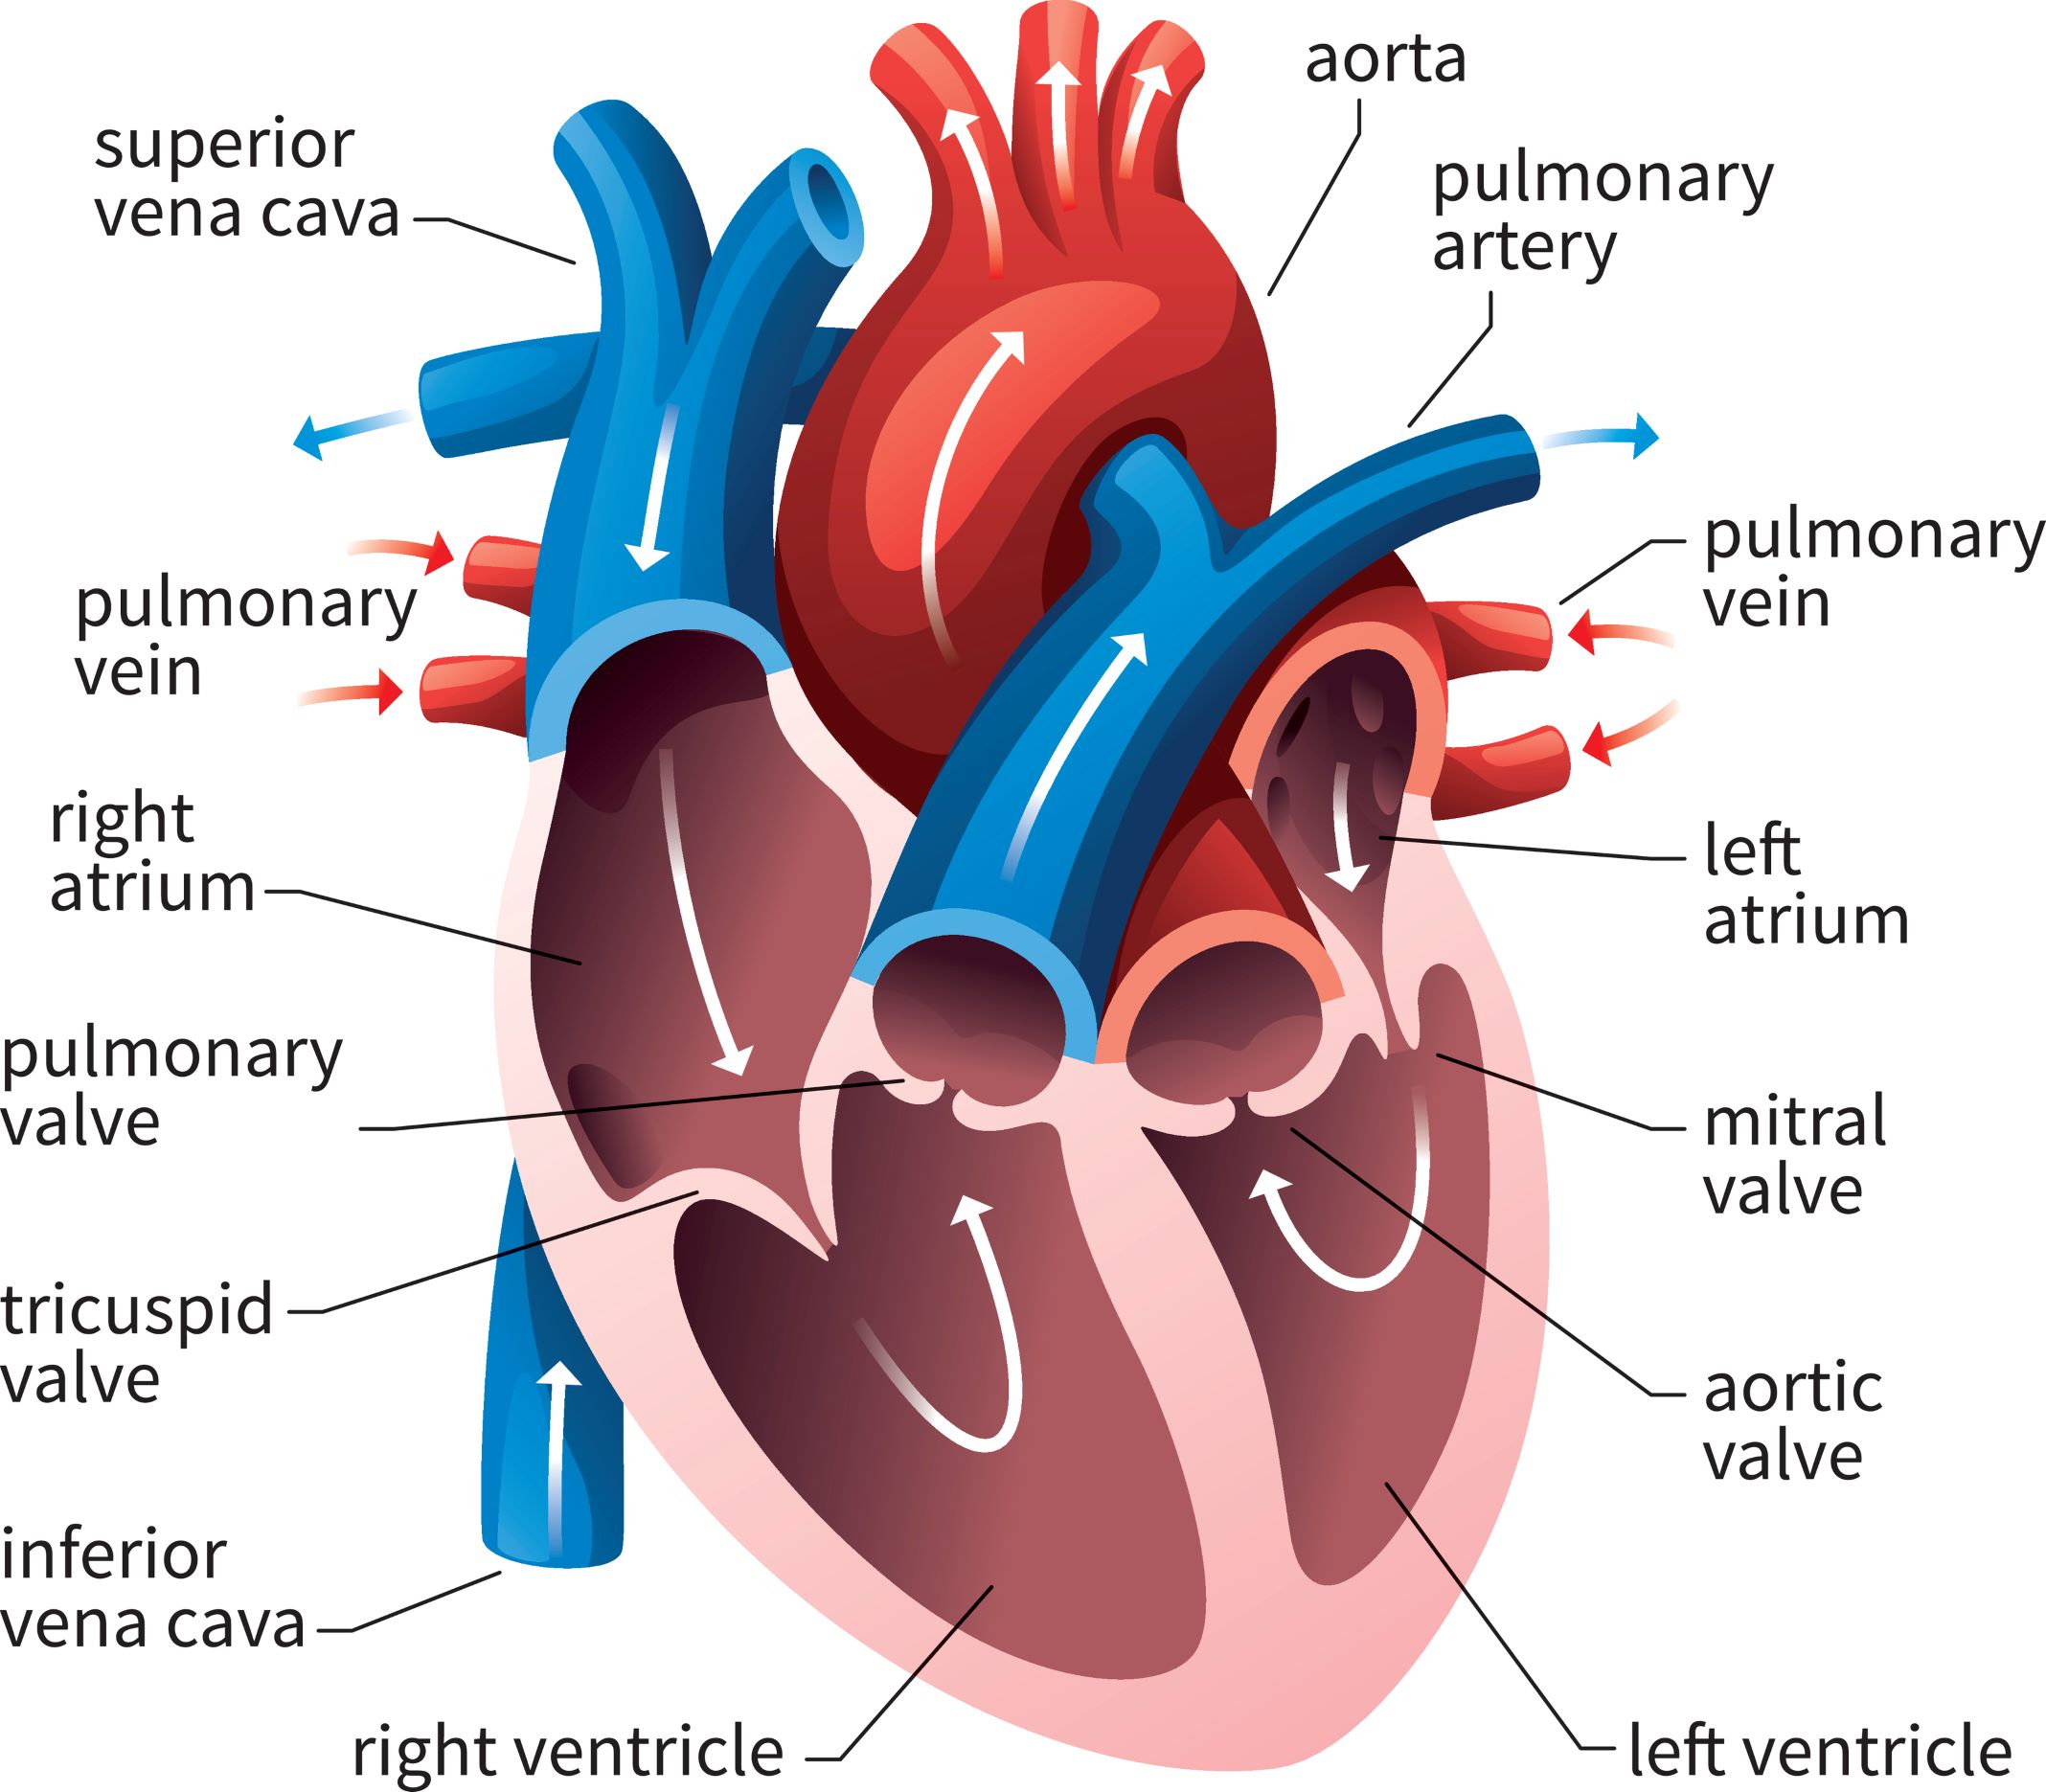 The human heart anatomy includes four chambers and four valves.